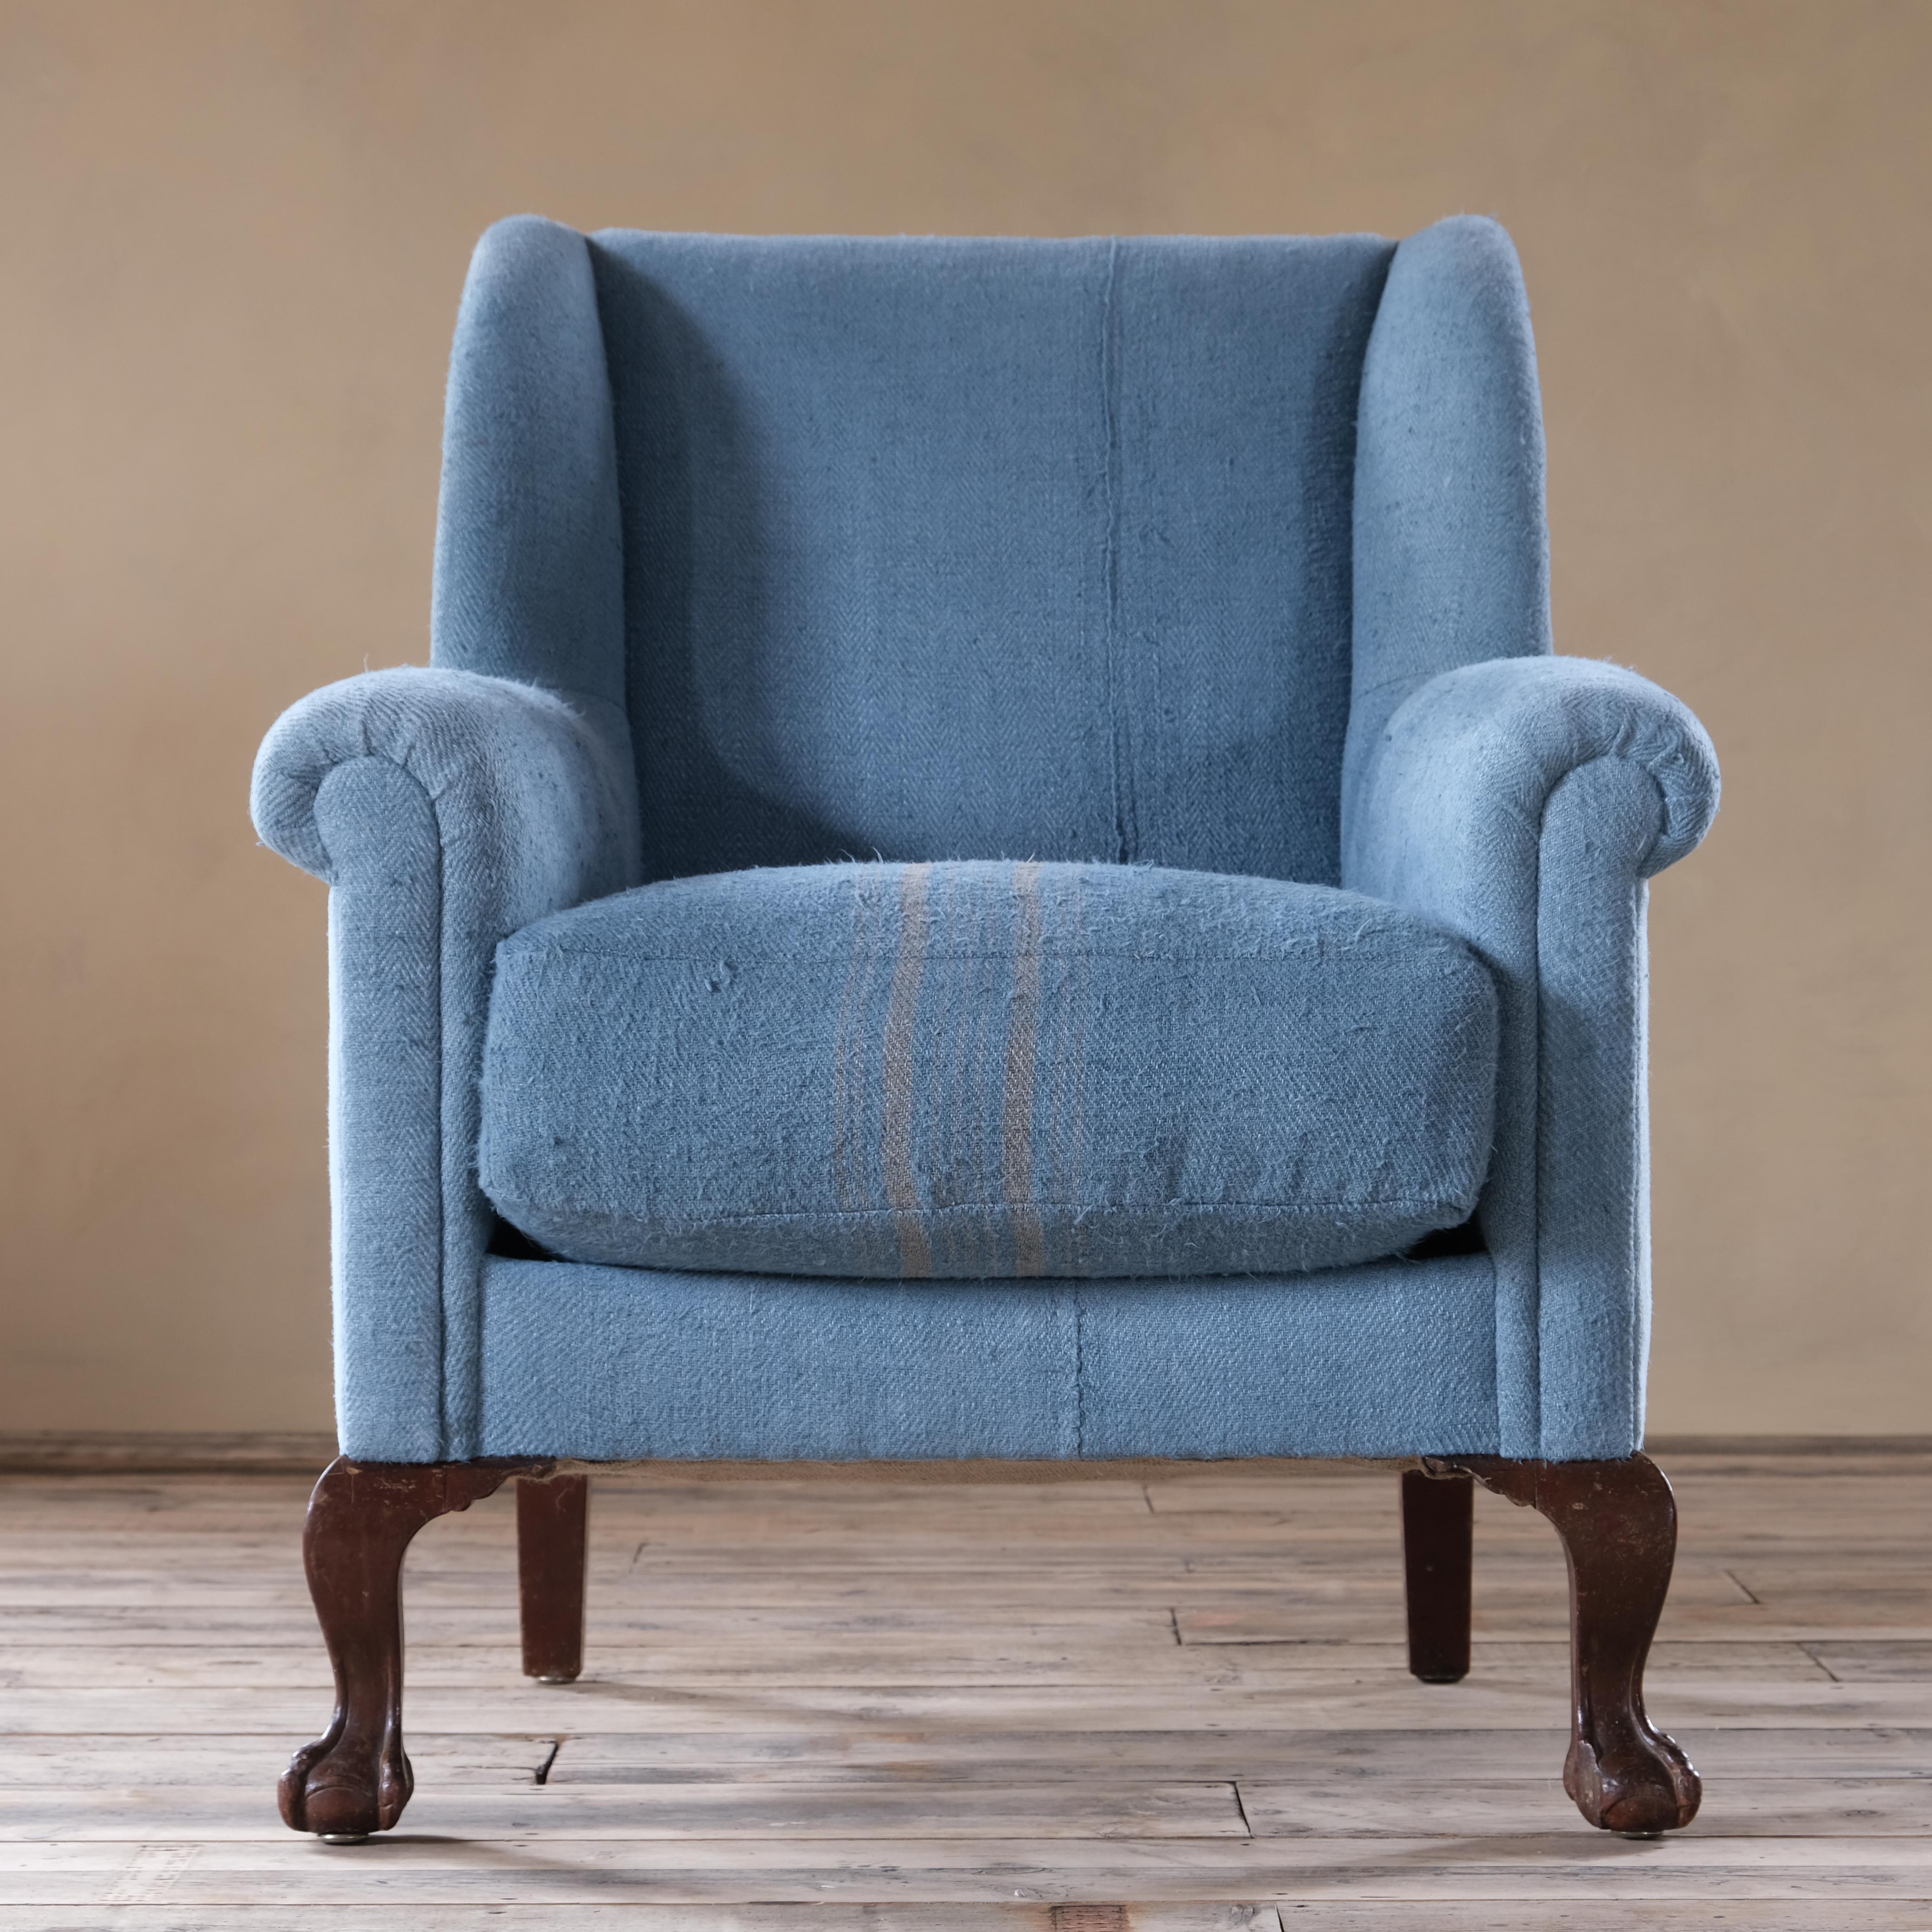 Victorian Early 20th Century Wingback Armchair in Grain Sacks For Sale